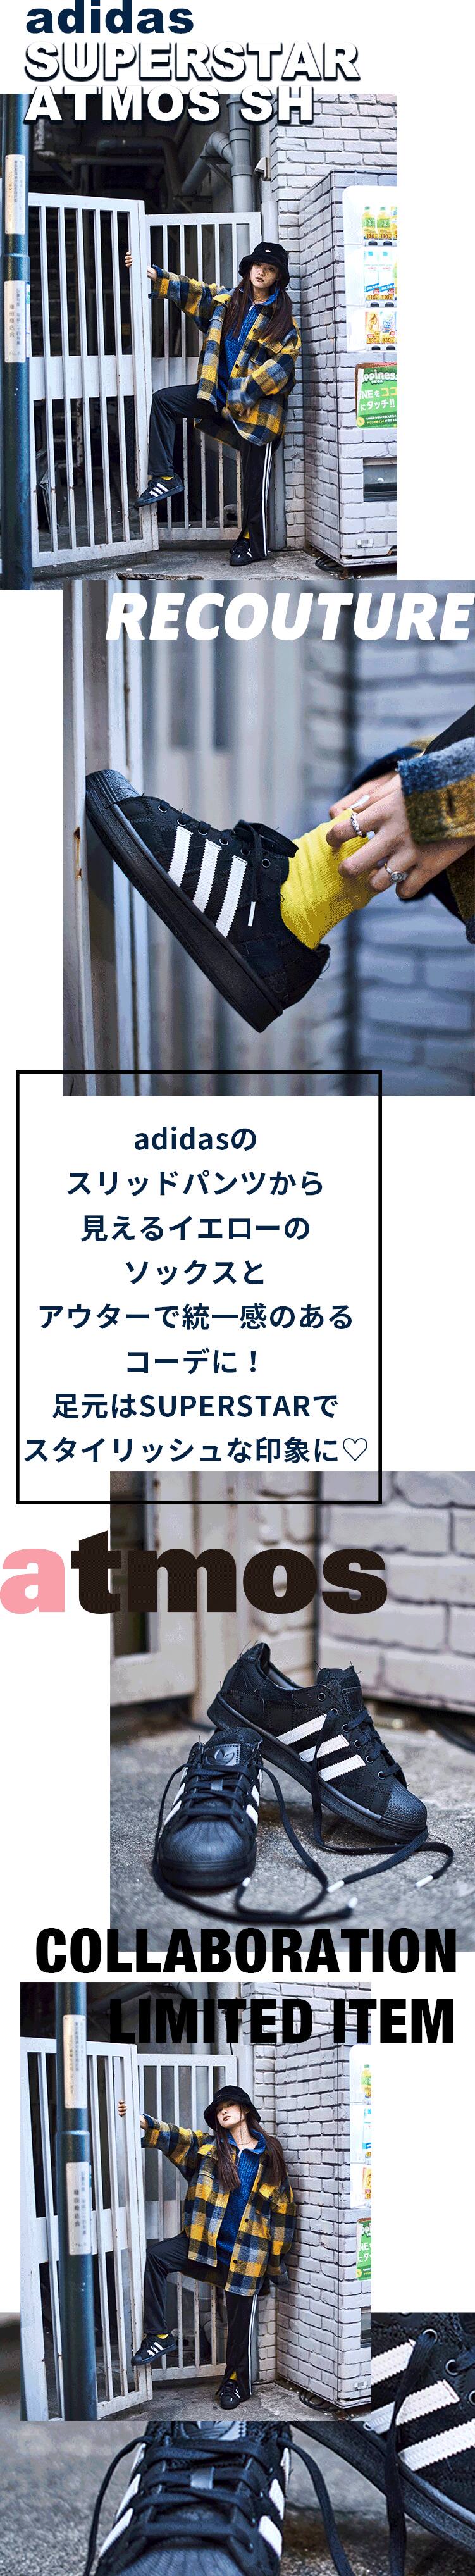 SUPERSTAR ATMOS SH by atmos pink